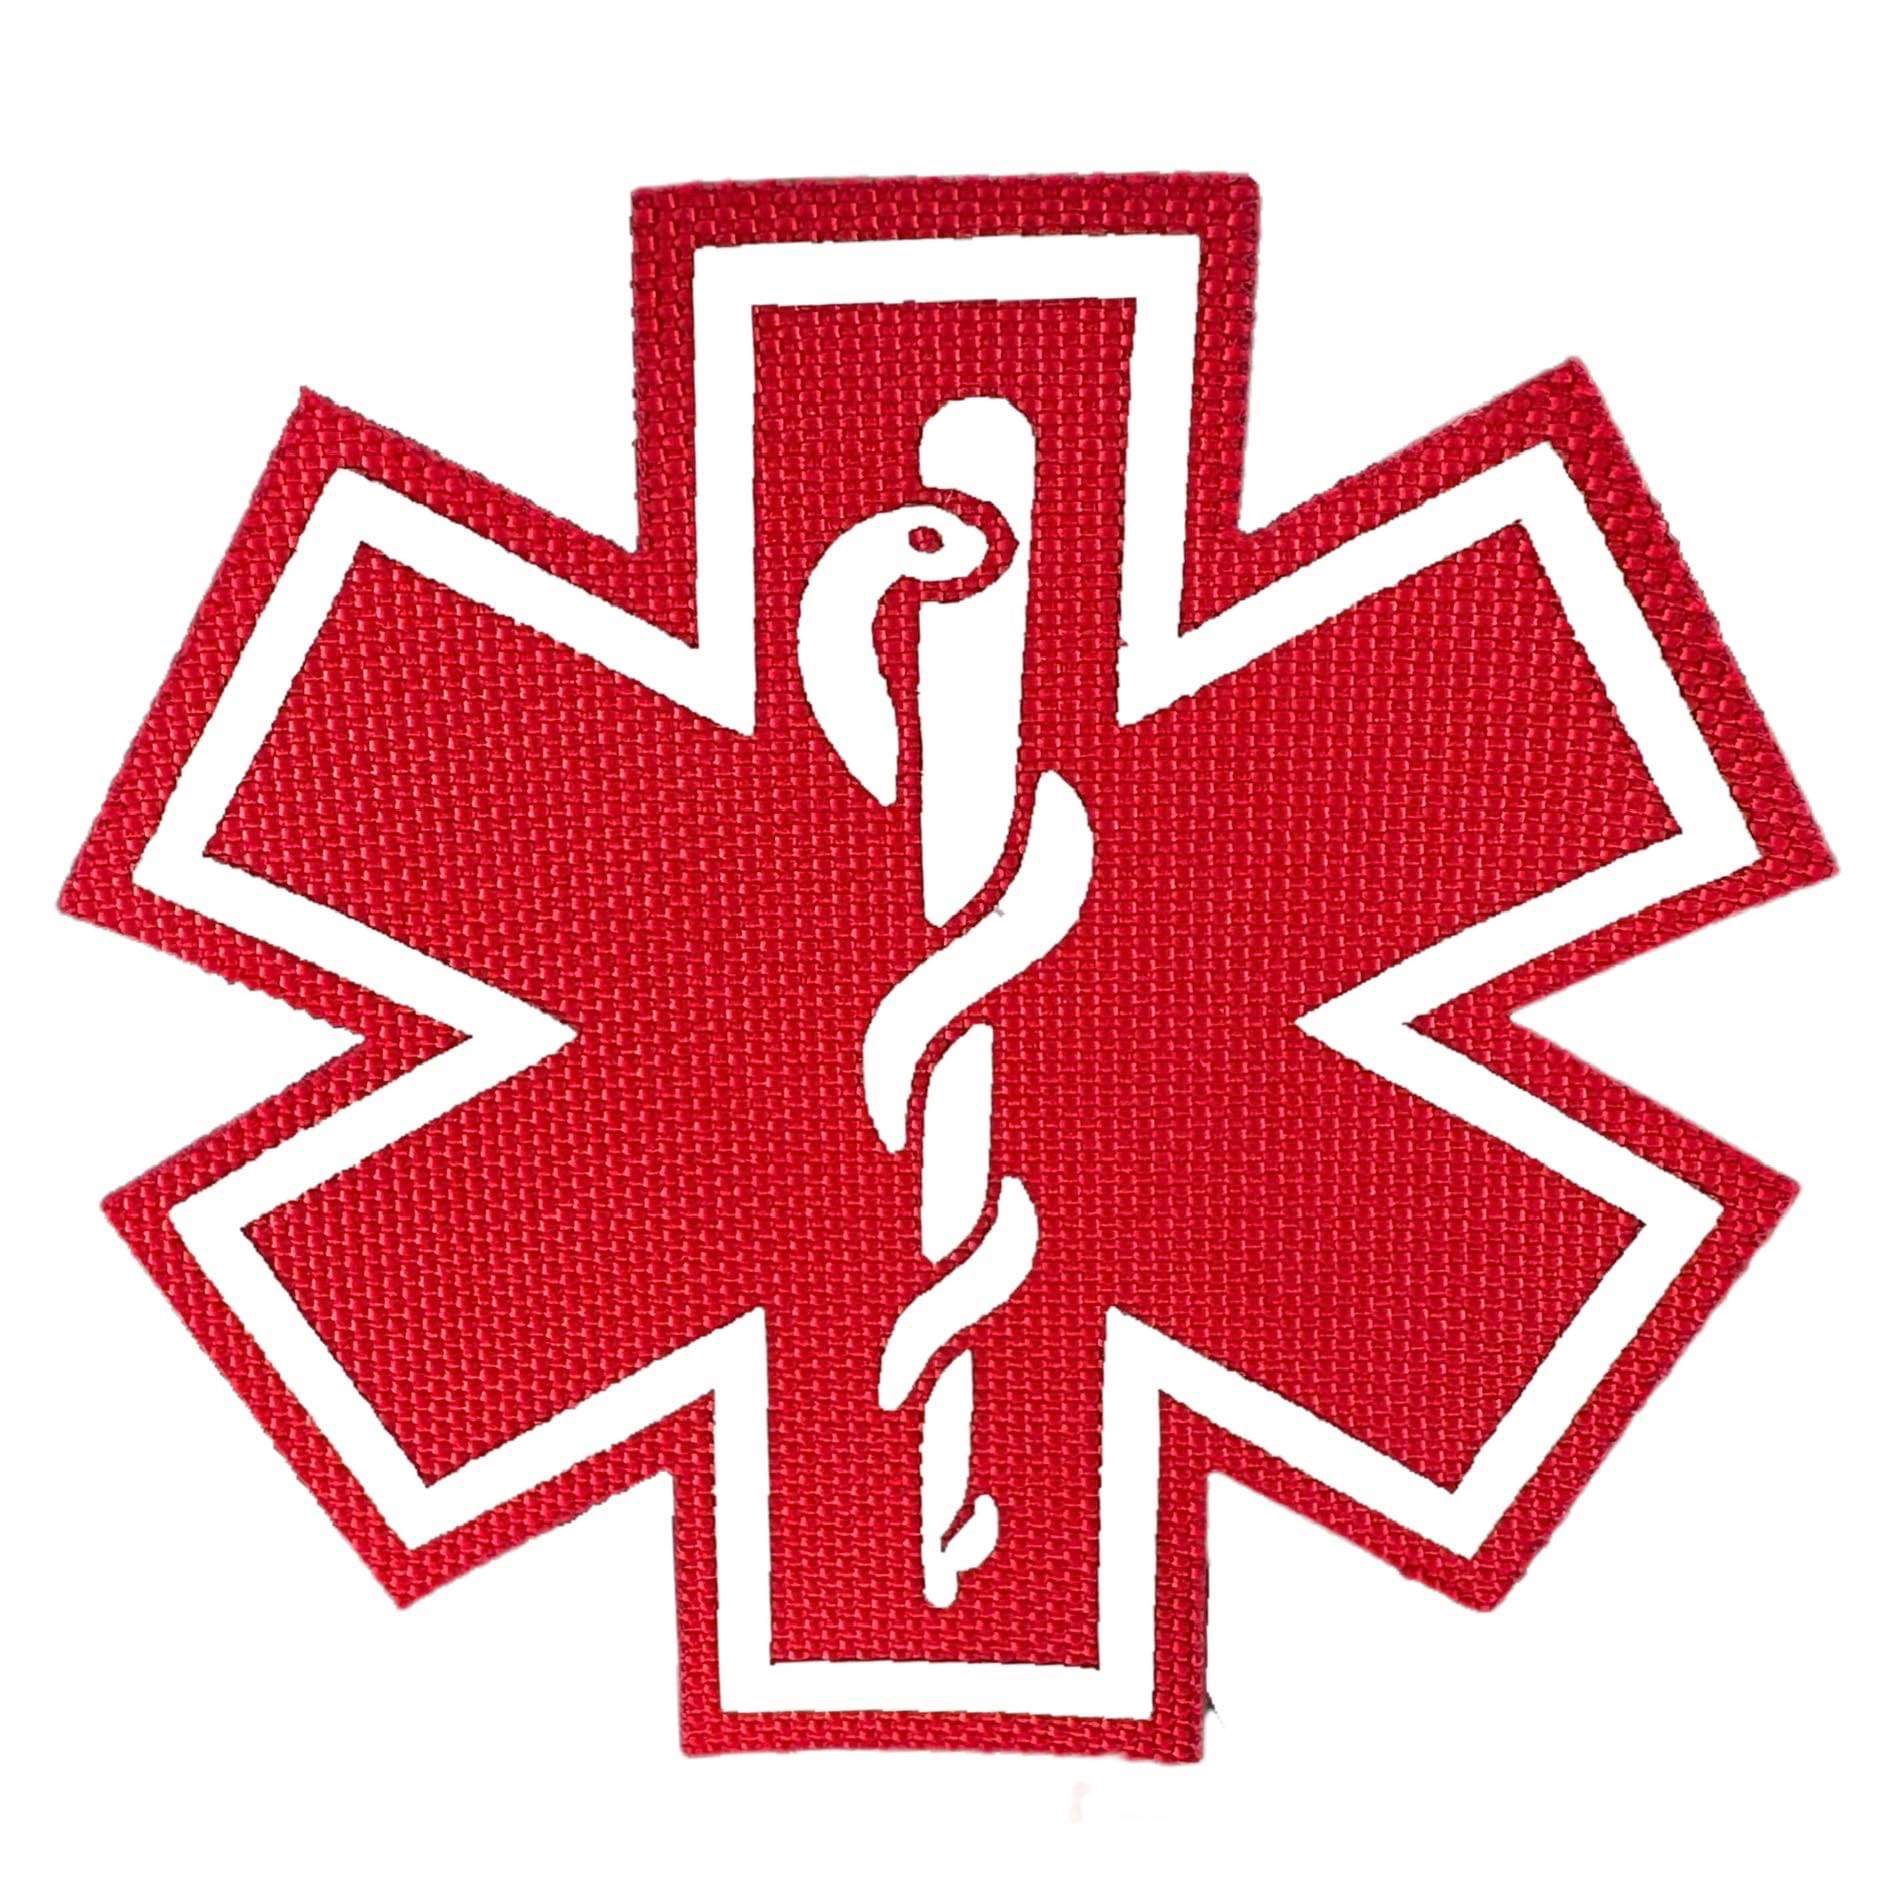 Laser Cut Patch - Medical Star of Life Reflective